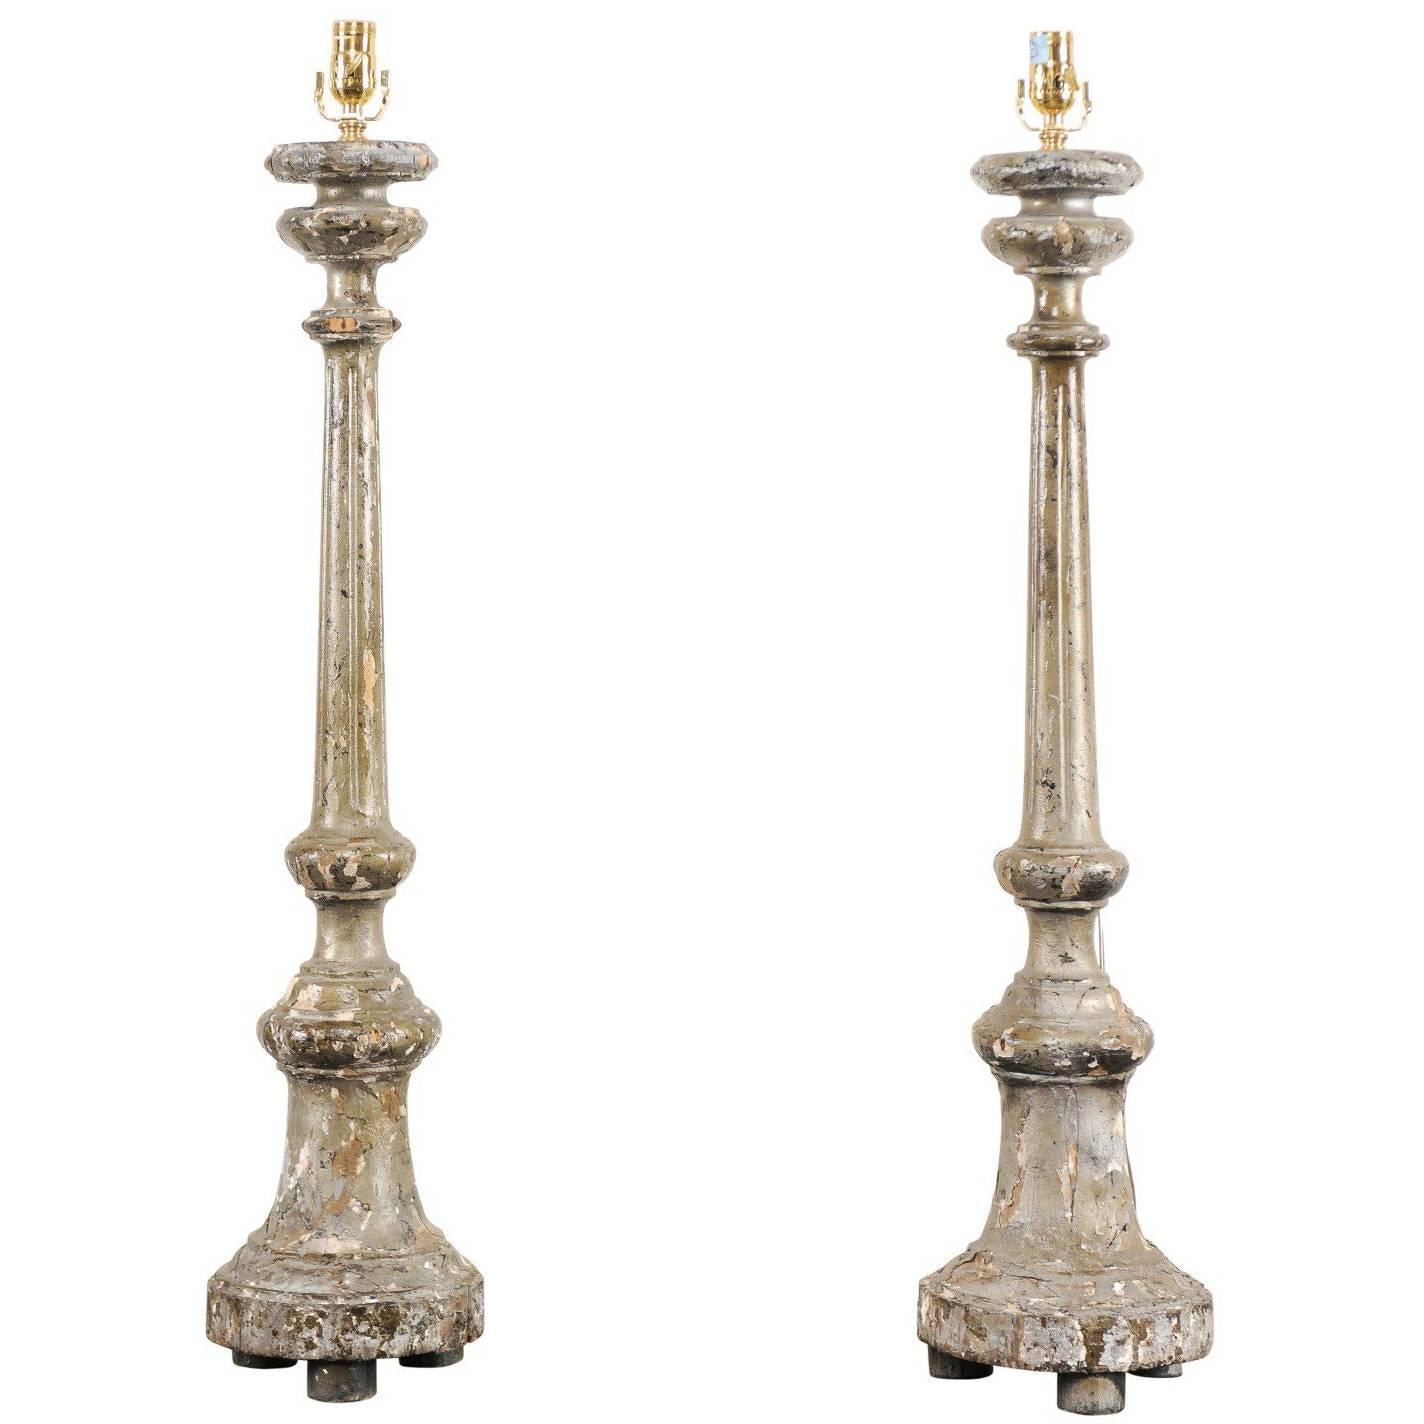 Pair of Italian 19th Century Carved Wood Altar Sticks Made into Table Lamps